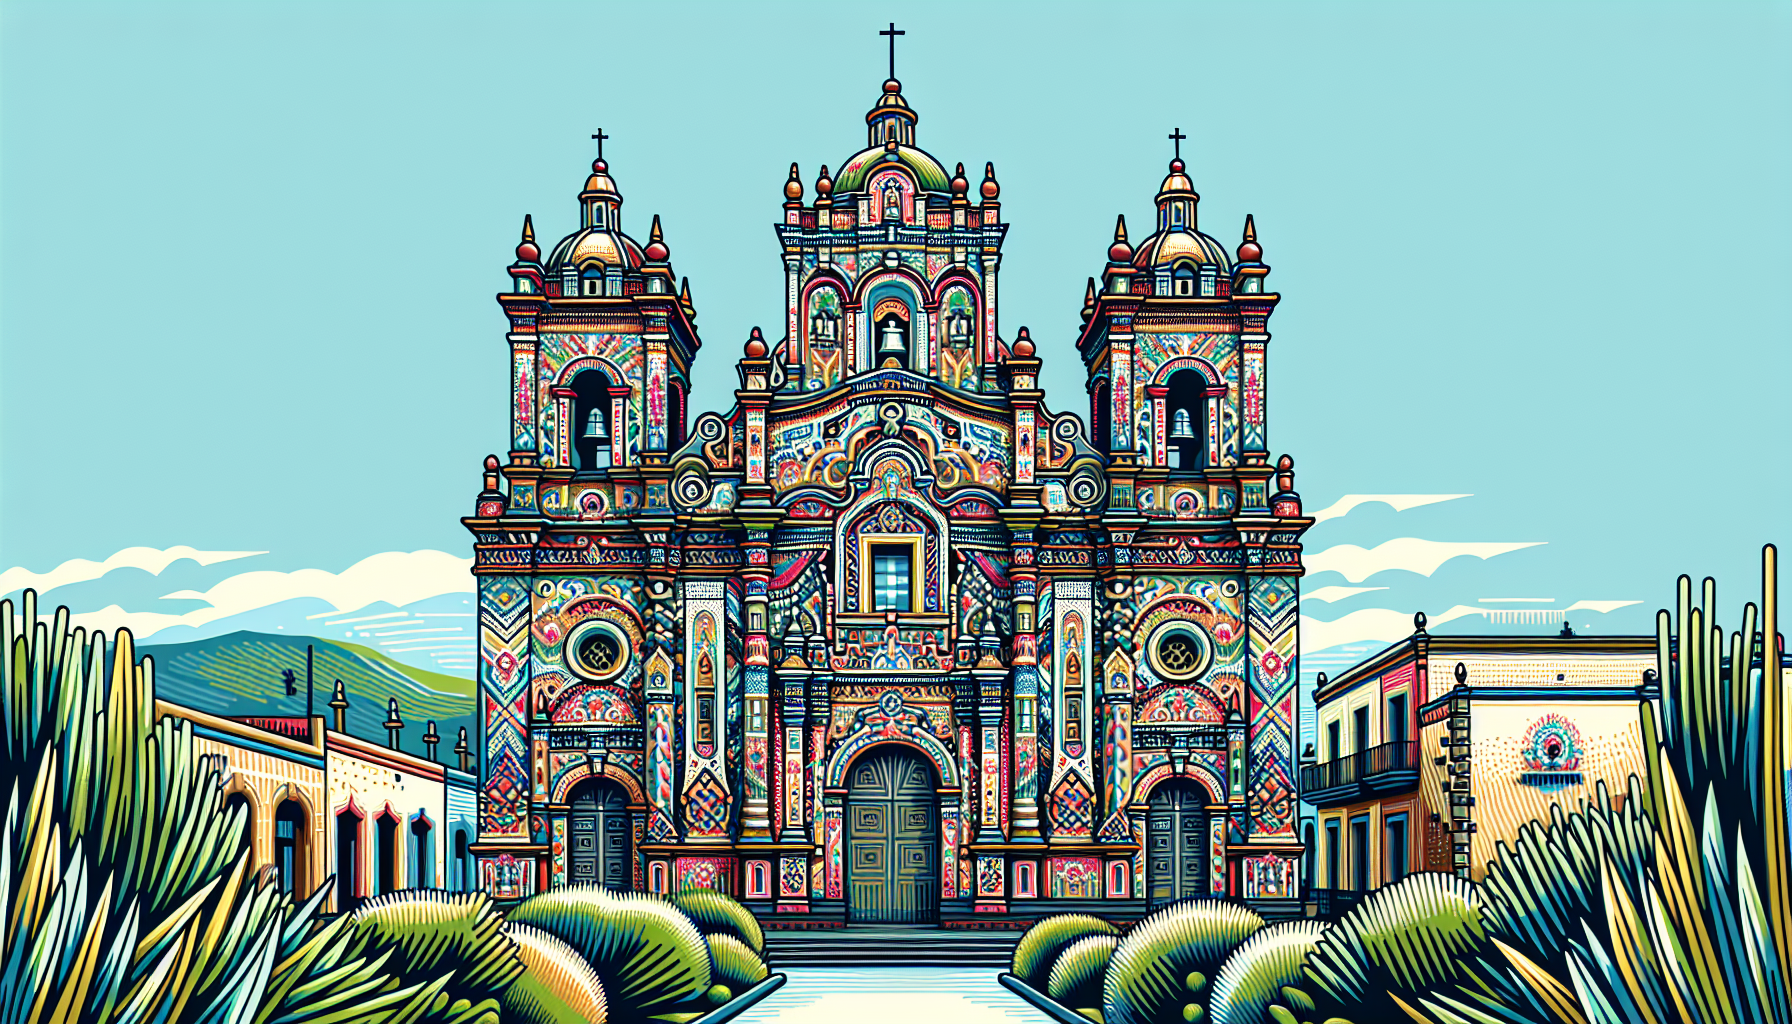 Create an image of a picturesque church in Toluca, Mexico, showcasing its unique architectural features and historical charm. Capture the beauty and grandeur of the church's facade, with intricate det